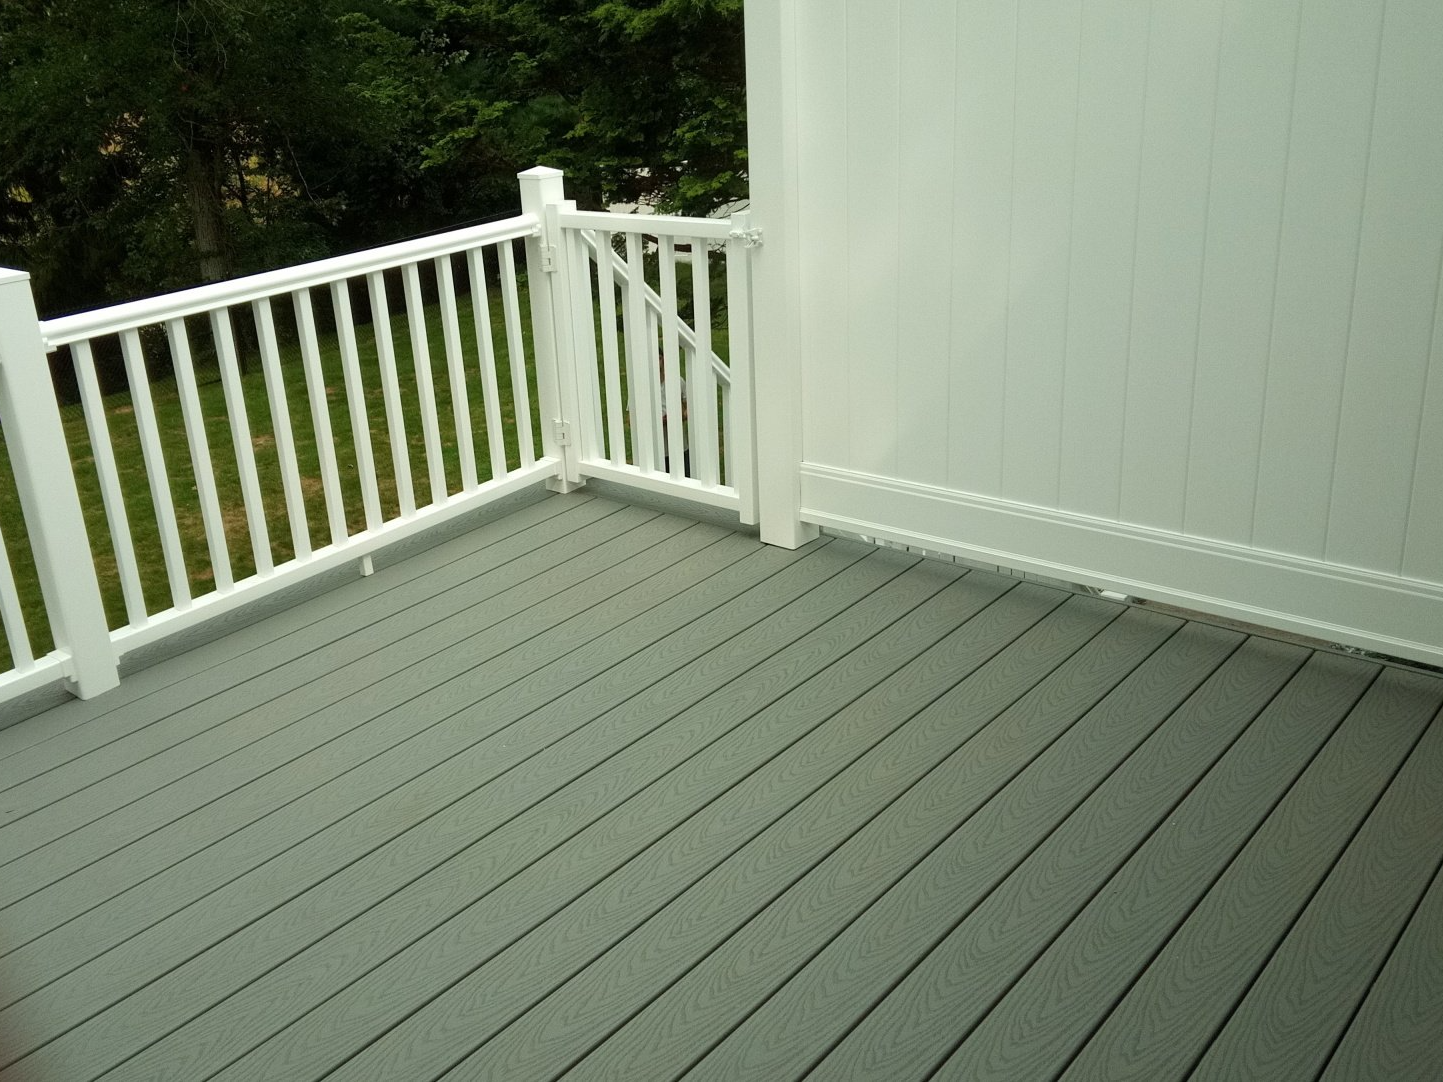 Photo of outdoor deck, railing, and fence.